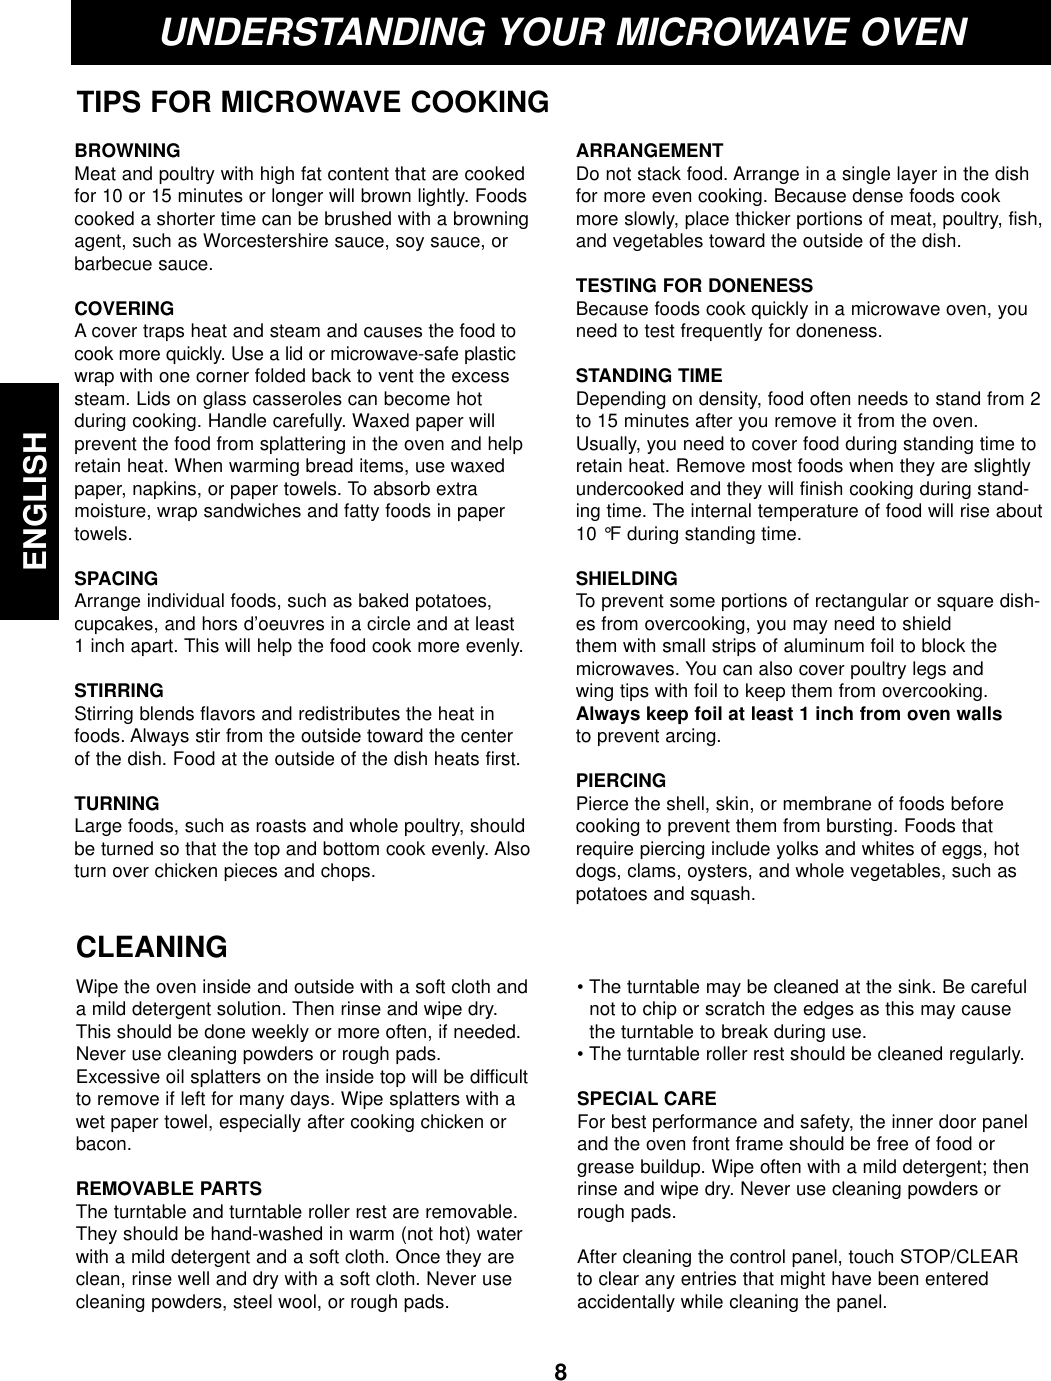 8ENGLISHUNDERSTANDING YOUR MICROWAVE OVENTIPS FOR MICROWAVE COOKINGBROWNINGMeat and poultry with high fat content that are cookedfor 10 or 15 minutes or longer will brown lightly. Foodscooked a shorter time can be brushed with a browningagent, such as Worcestershire sauce, soy sauce, orbarbecue sauce.COVERING A cover traps heat and steam and causes the food tocook more quickly. Use a lid or microwave-safe plasticwrap with one corner folded back to vent the excesssteam. Lids on glass casseroles can become hot during cooking. Handle carefully. Waxed paper will prevent the food from splattering in the oven and helpretain heat. When warming bread items, use waxedpaper, napkins, or paper towels. To absorb extra moisture, wrap sandwiches and fatty foods in papertowels.SPACINGArrange individual foods, such as baked potatoes, cupcakes, and hors d’oeuvres in a circle and at least 1 inch apart. This will help the food cook more evenly.STIRRING Stirring blends flavors and redistributes the heat infoods. Always stir from the outside toward the center of the dish. Food at the outside of the dish heats first.TURNINGLarge foods, such as roasts and whole poultry, shouldbe turned so that the top and bottom cook evenly. Alsoturn over chicken pieces and chops.ARRANGEMENTDo not stack food. Arrange in a single layer in the dishfor more even cooking. Because dense foods cookmore slowly, place thicker portions of meat, poultry, fish,and vegetables toward the outside of the dish.TESTING FOR DONENESS Because foods cook quickly in a microwave oven, youneed to test frequently for doneness.STANDING TIME Depending on density, food often needs to stand from 2to 15 minutes after you remove it from the oven.Usually, you need to cover food during standing time toretain heat. Remove most foods when they are slightlyundercooked and they will finish cooking during stand-ing time. The internal temperature of food will rise about10 °F during standing time.SHIELDING To prevent some portions of rectangular or square dish-es from overcooking, you may need to shield them with small strips of aluminum foil to block themicrowaves. You can also cover poultry legs and wing tips with foil to keep them from overcooking.Always keep foil at least 1 inch from oven wallsto prevent arcing.PIERCING Pierce the shell, skin, or membrane of foods beforecooking to prevent them from bursting. Foods thatrequire piercing include yolks and whites of eggs, hotdogs, clams, oysters, and whole vegetables, such aspotatoes and squash.CLEANINGWipe the oven inside and outside with a soft cloth anda mild detergent solution. Then rinse and wipe dry.This should be done weekly or more often, if needed.Never use cleaning powders or rough pads.Excessive oil splatters on the inside top will be difficultto remove if left for many days. Wipe splatters with awet paper towel, especially after cooking chicken orbacon.REMOVABLE PARTSThe turntable and turntable roller rest are removable.They should be hand-washed in warm (not hot) waterwith a mild detergent and a soft cloth. Once they areclean, rinse well and dry with a soft cloth. Never usecleaning powders, steel wool, or rough pads.• The turntable may be cleaned at the sink. Be carefulnot to chip or scratch the edges as this may causethe turntable to break during use.• The turntable roller rest should be cleaned regularly.SPECIAL CAREFor best performance and safety, the inner door paneland the oven front frame should be free of food orgrease buildup. Wipe often with a mild detergent; thenrinse and wipe dry. Never use cleaning powders orrough pads.After cleaning the control panel, touch STOP/CLEARto clear any entries that might have been enteredaccidentally while cleaning the panel.